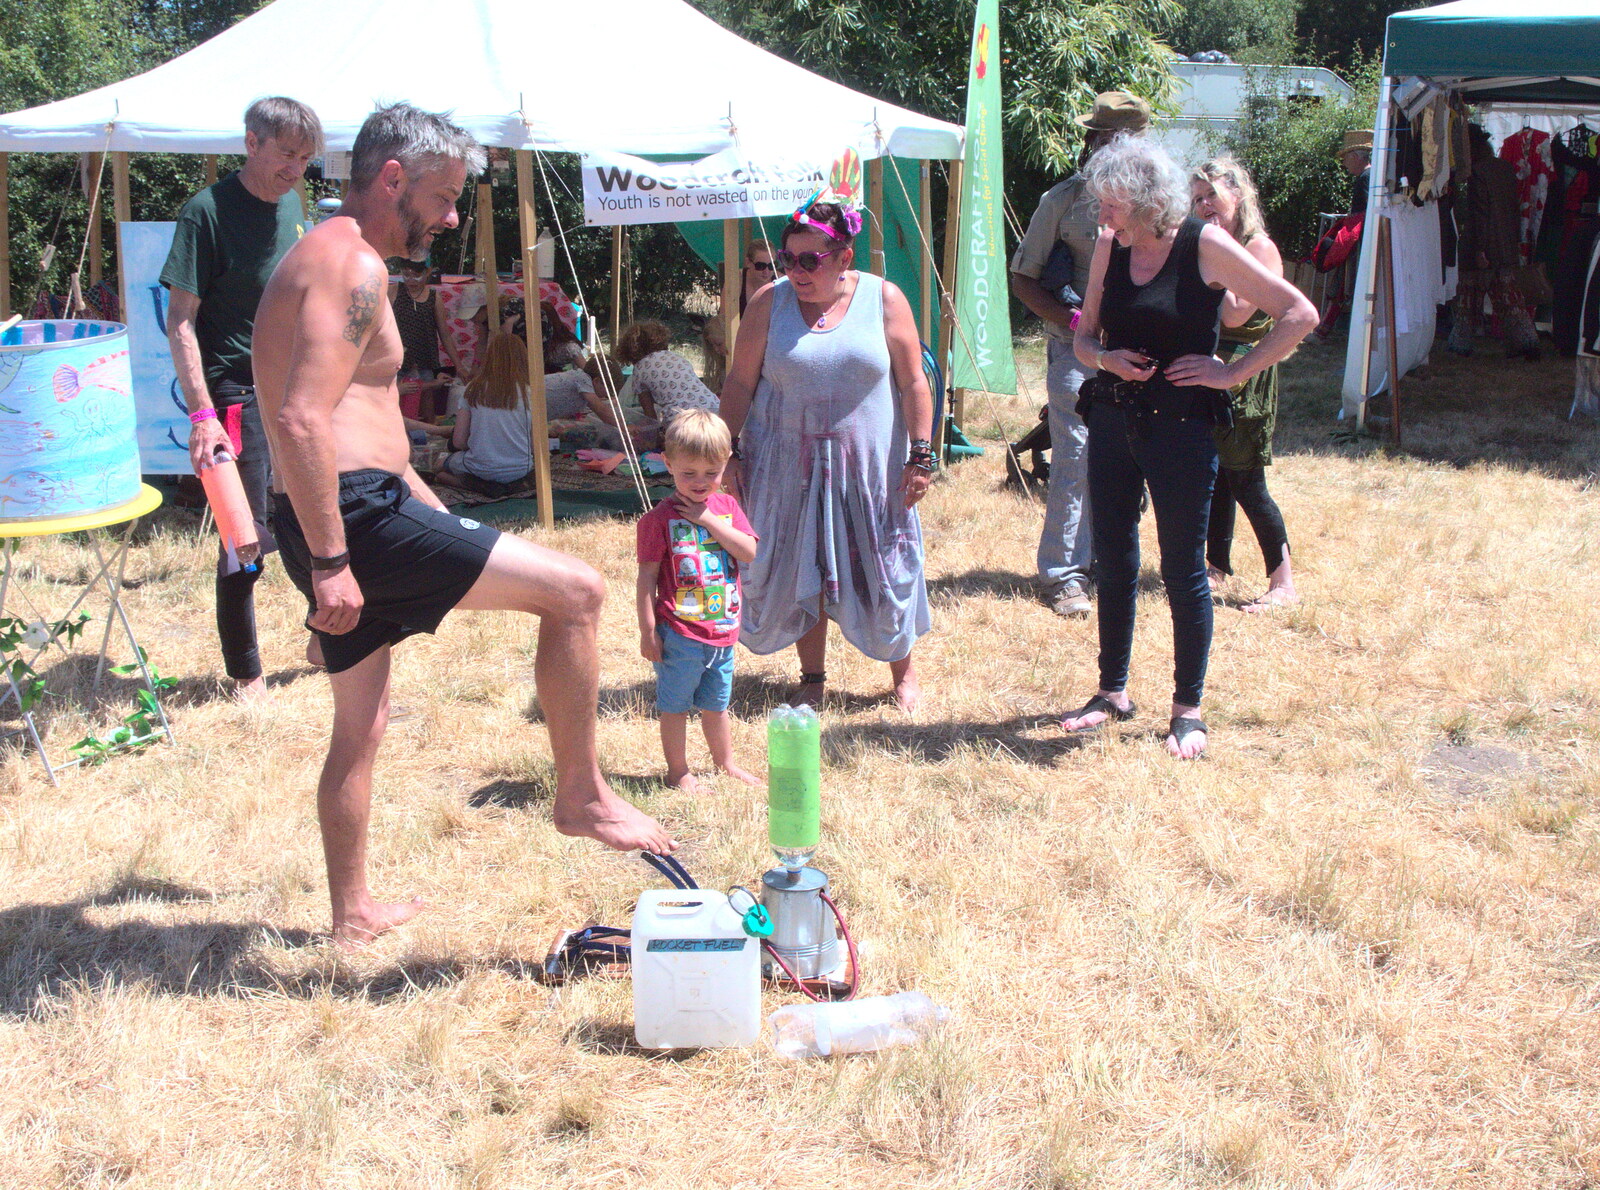 More foot-powered water rockets from WoW Festival, Burston, Norfolk - 29th June - 1st July 2018